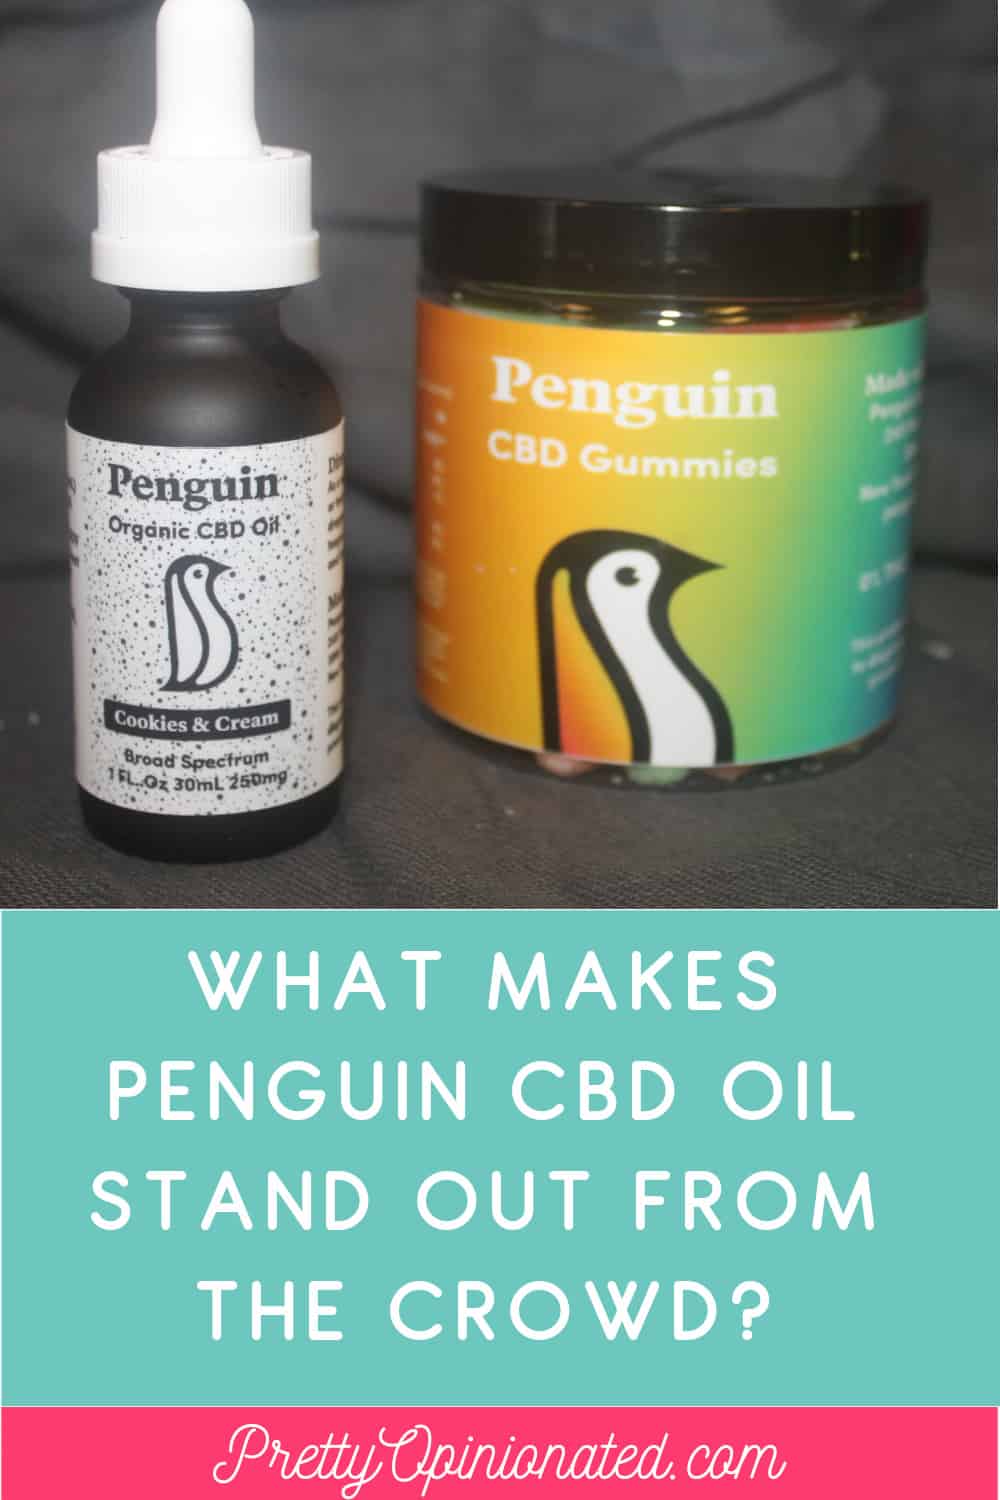 What makes Penguin CBD oil stand out from a sea of CBD brands? I tried out two of their edible products- gummies and sublingual oil- to find out. Read on for my full review.